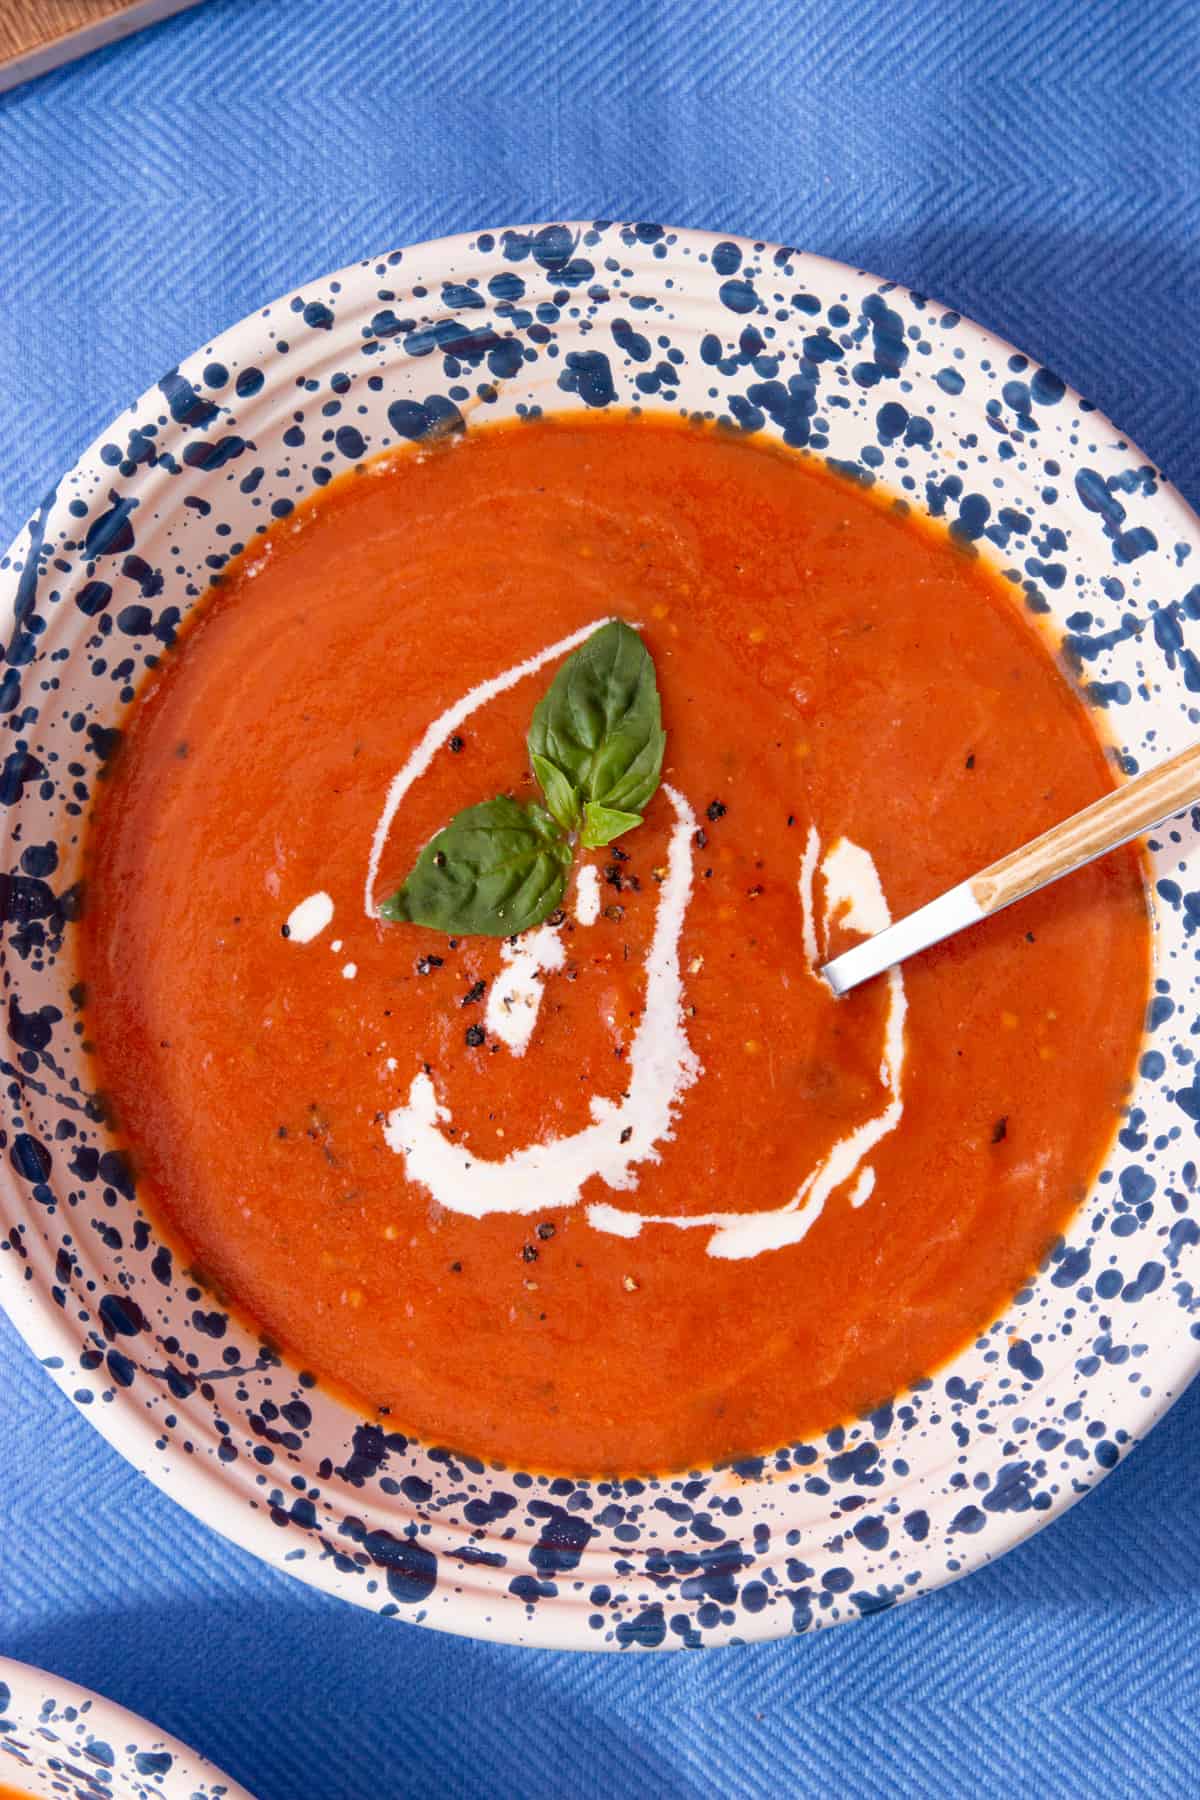 Overhead shot of tomato soup with a swirl of cream and some fresh basil in a cream bowl with blue spotty pattern on a blue cloth background.